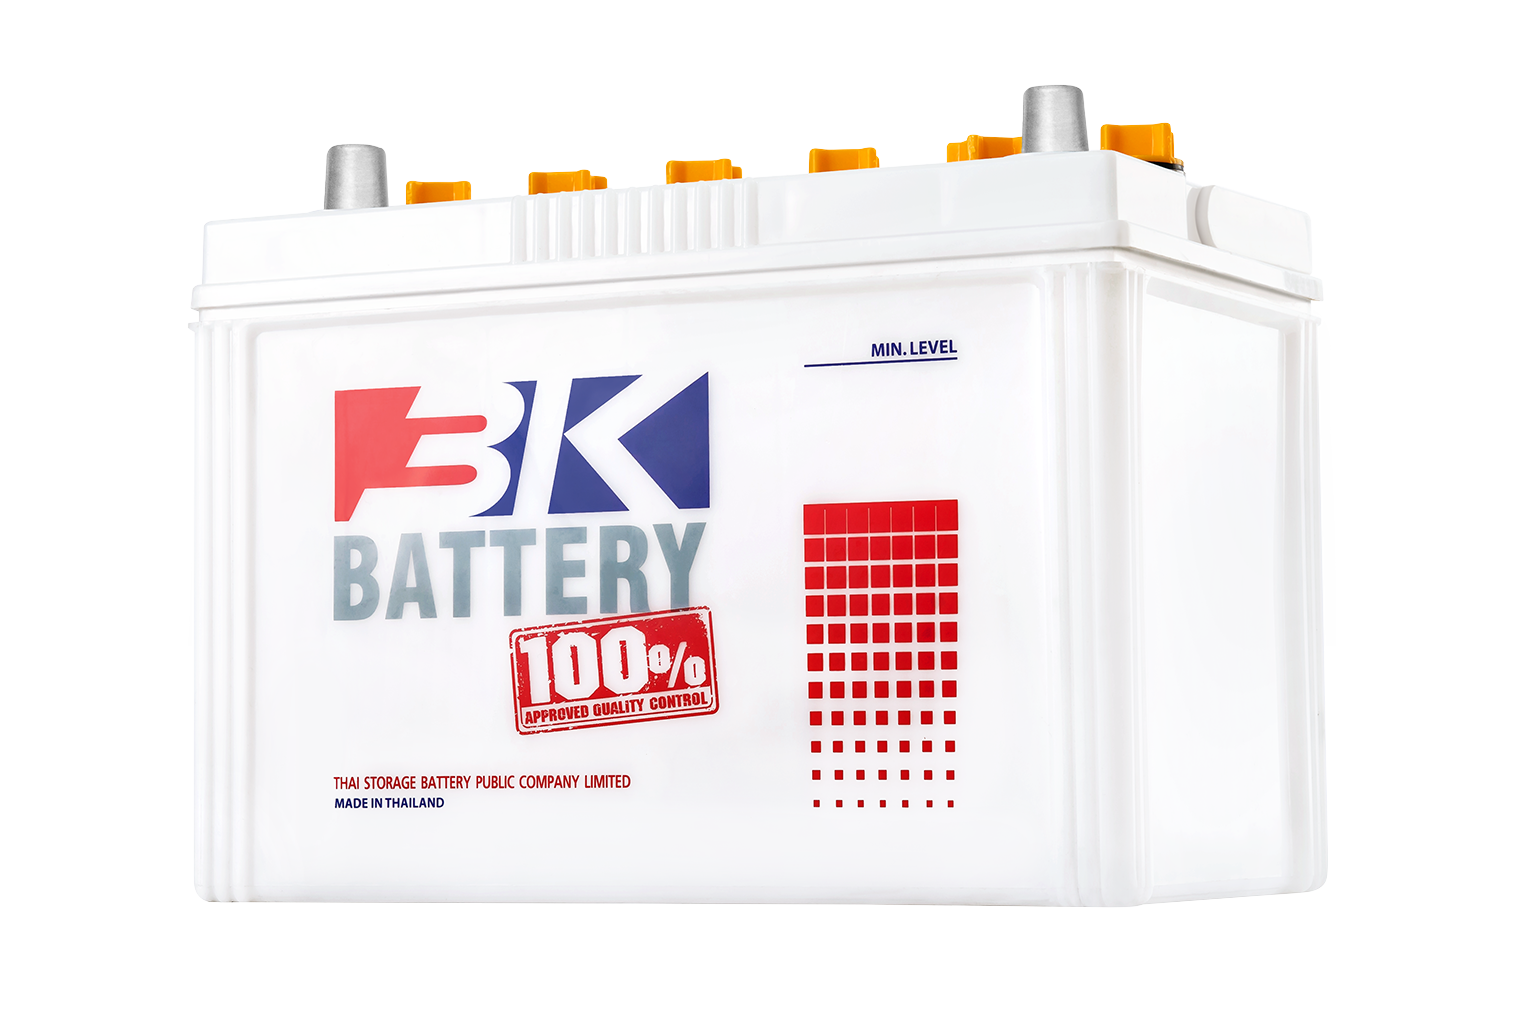 Battery 3K NS100 (Conventional Type) 12V 75Ah